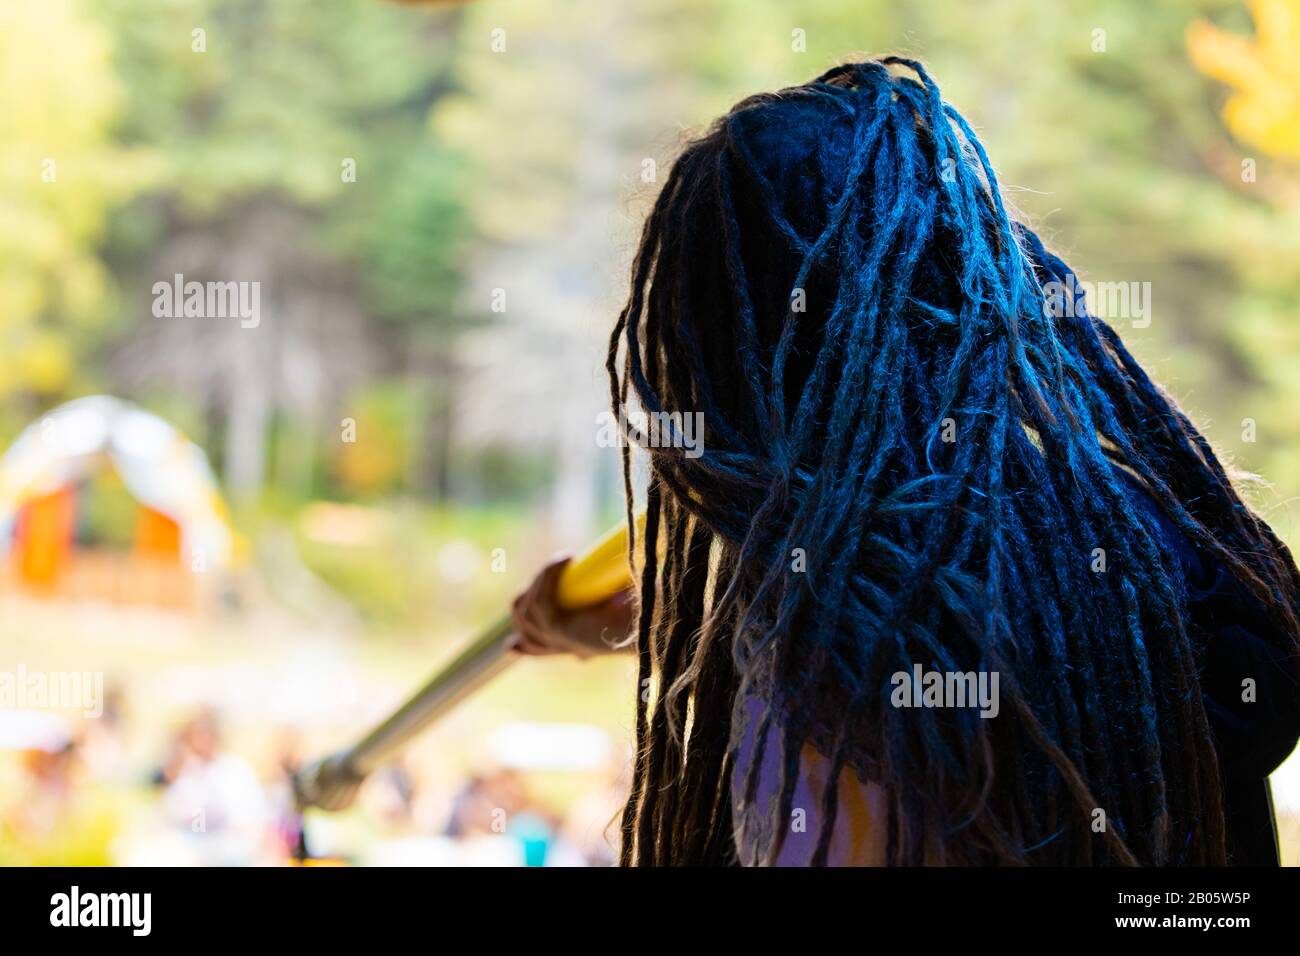 A close up selective focus shot of a woman with blue dreadlocks playing a didgeridoo. during a native culture and music festival with blurry trees in background Stock Photo